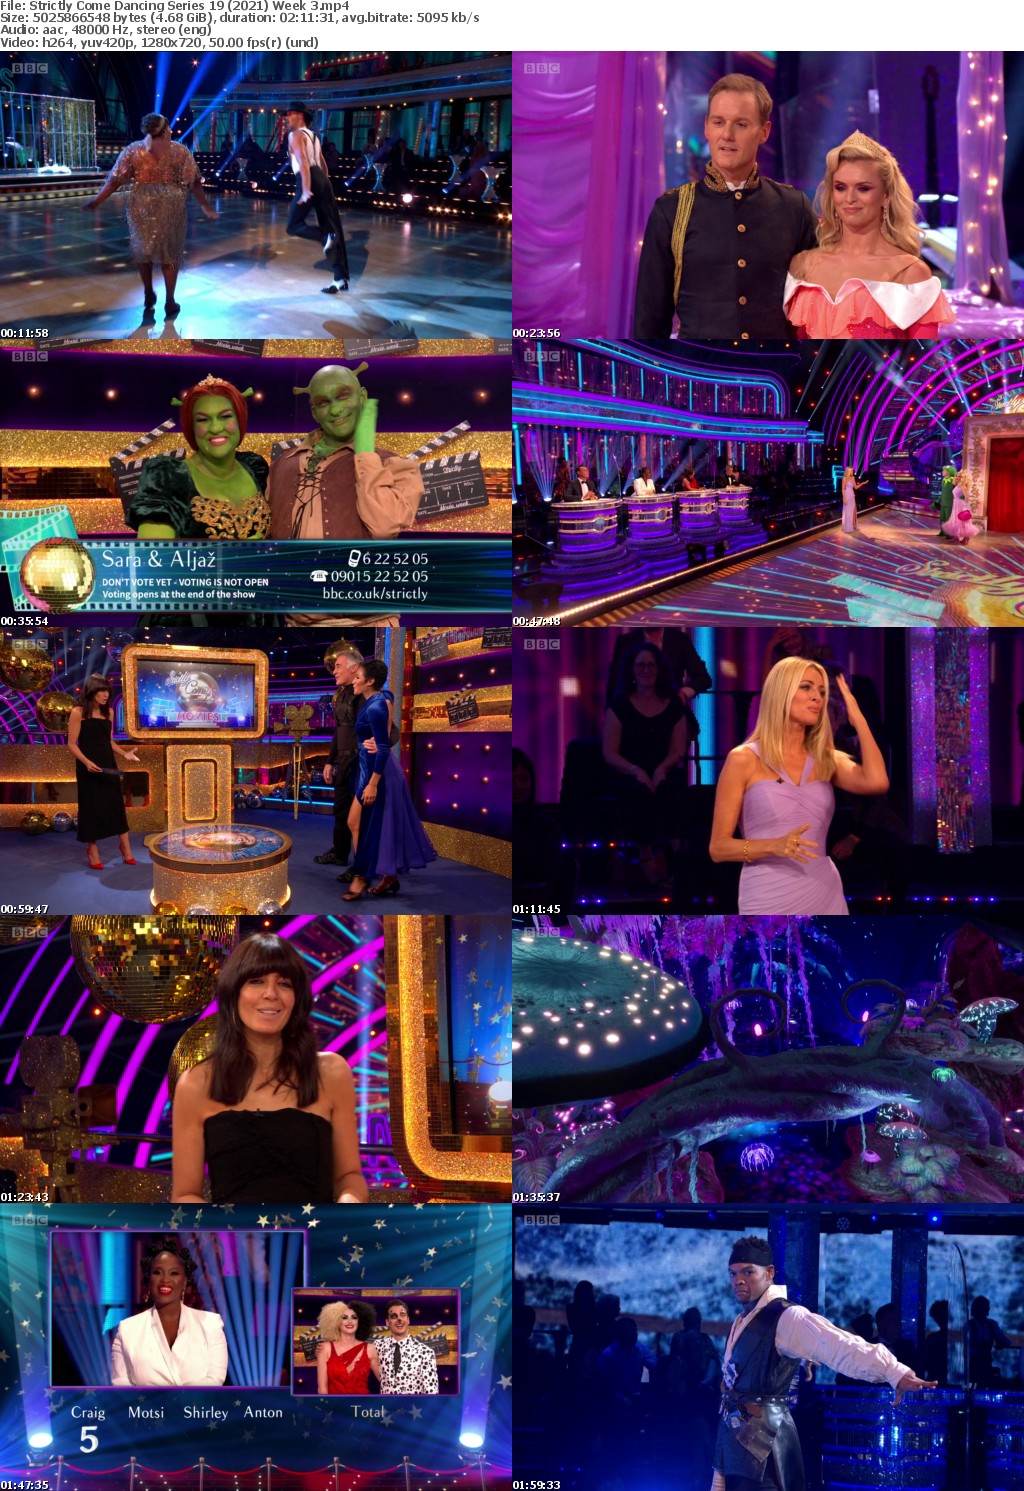 Strictly Come Dancing Series 19 (2021) Week 3 (1280x720p HD, 50fps, soft Eng subs)